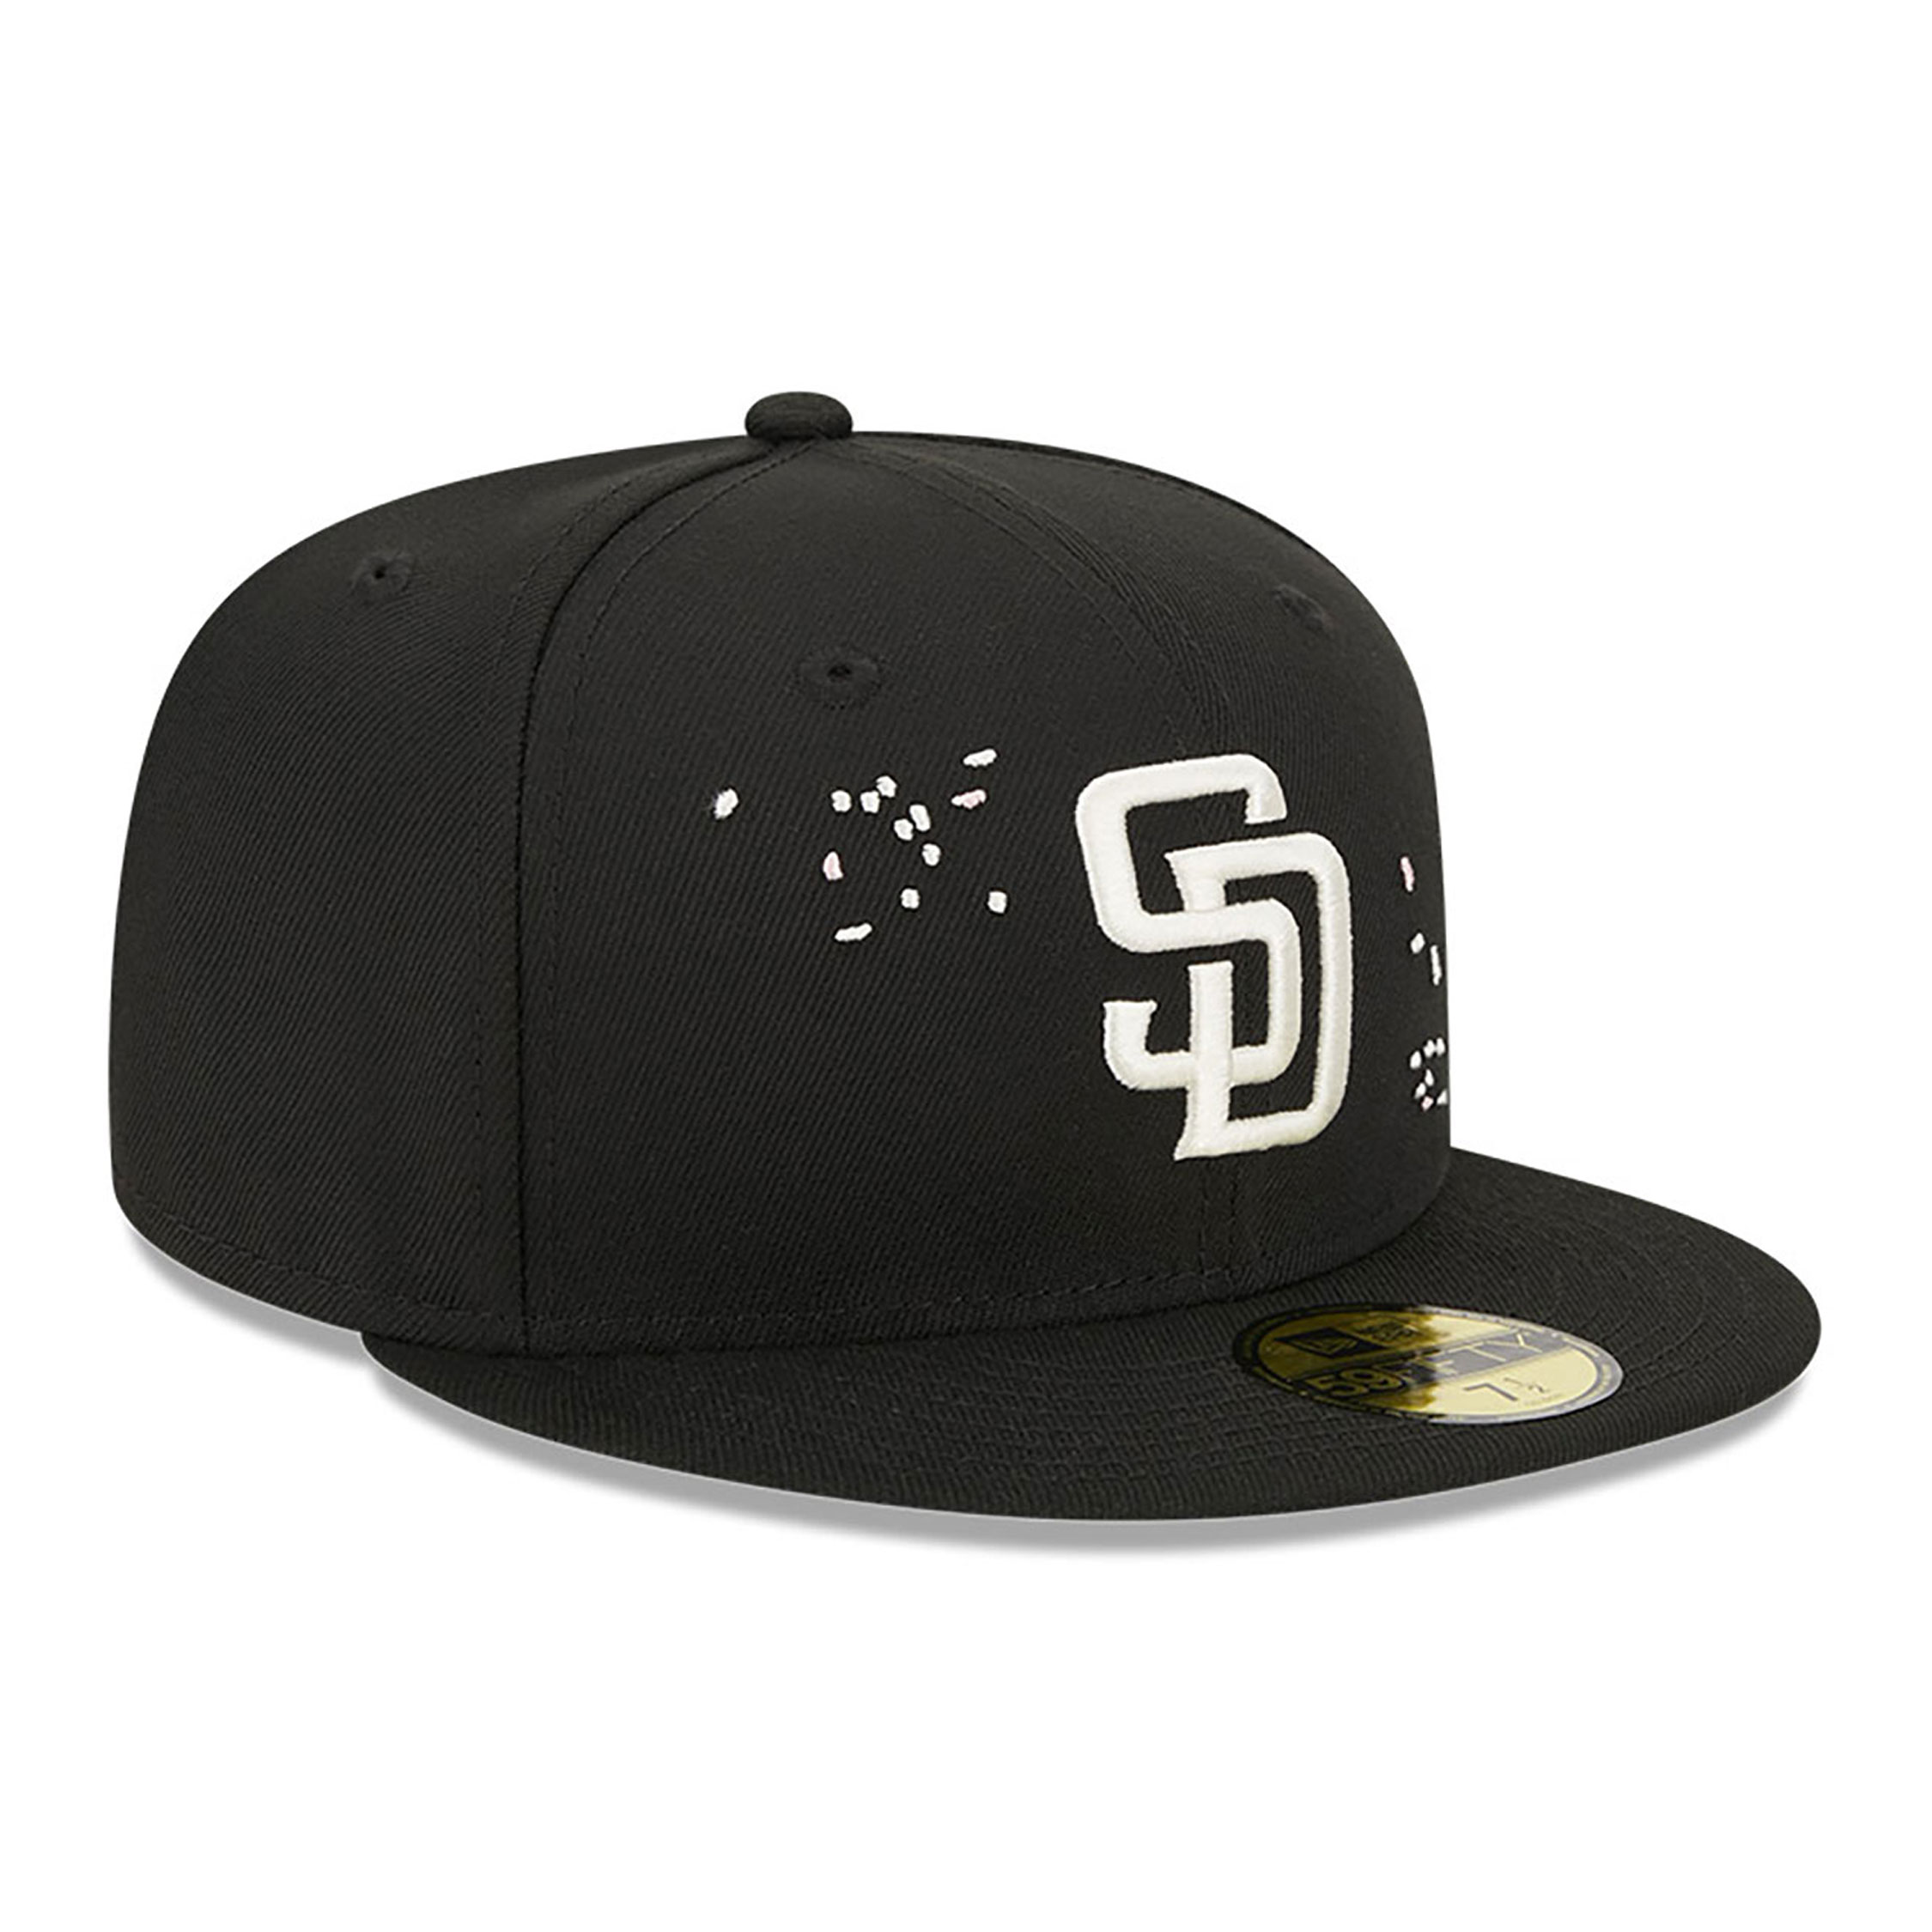 San Diego Padres Cherry Blossom Black 59FIFTY Fitted Cap